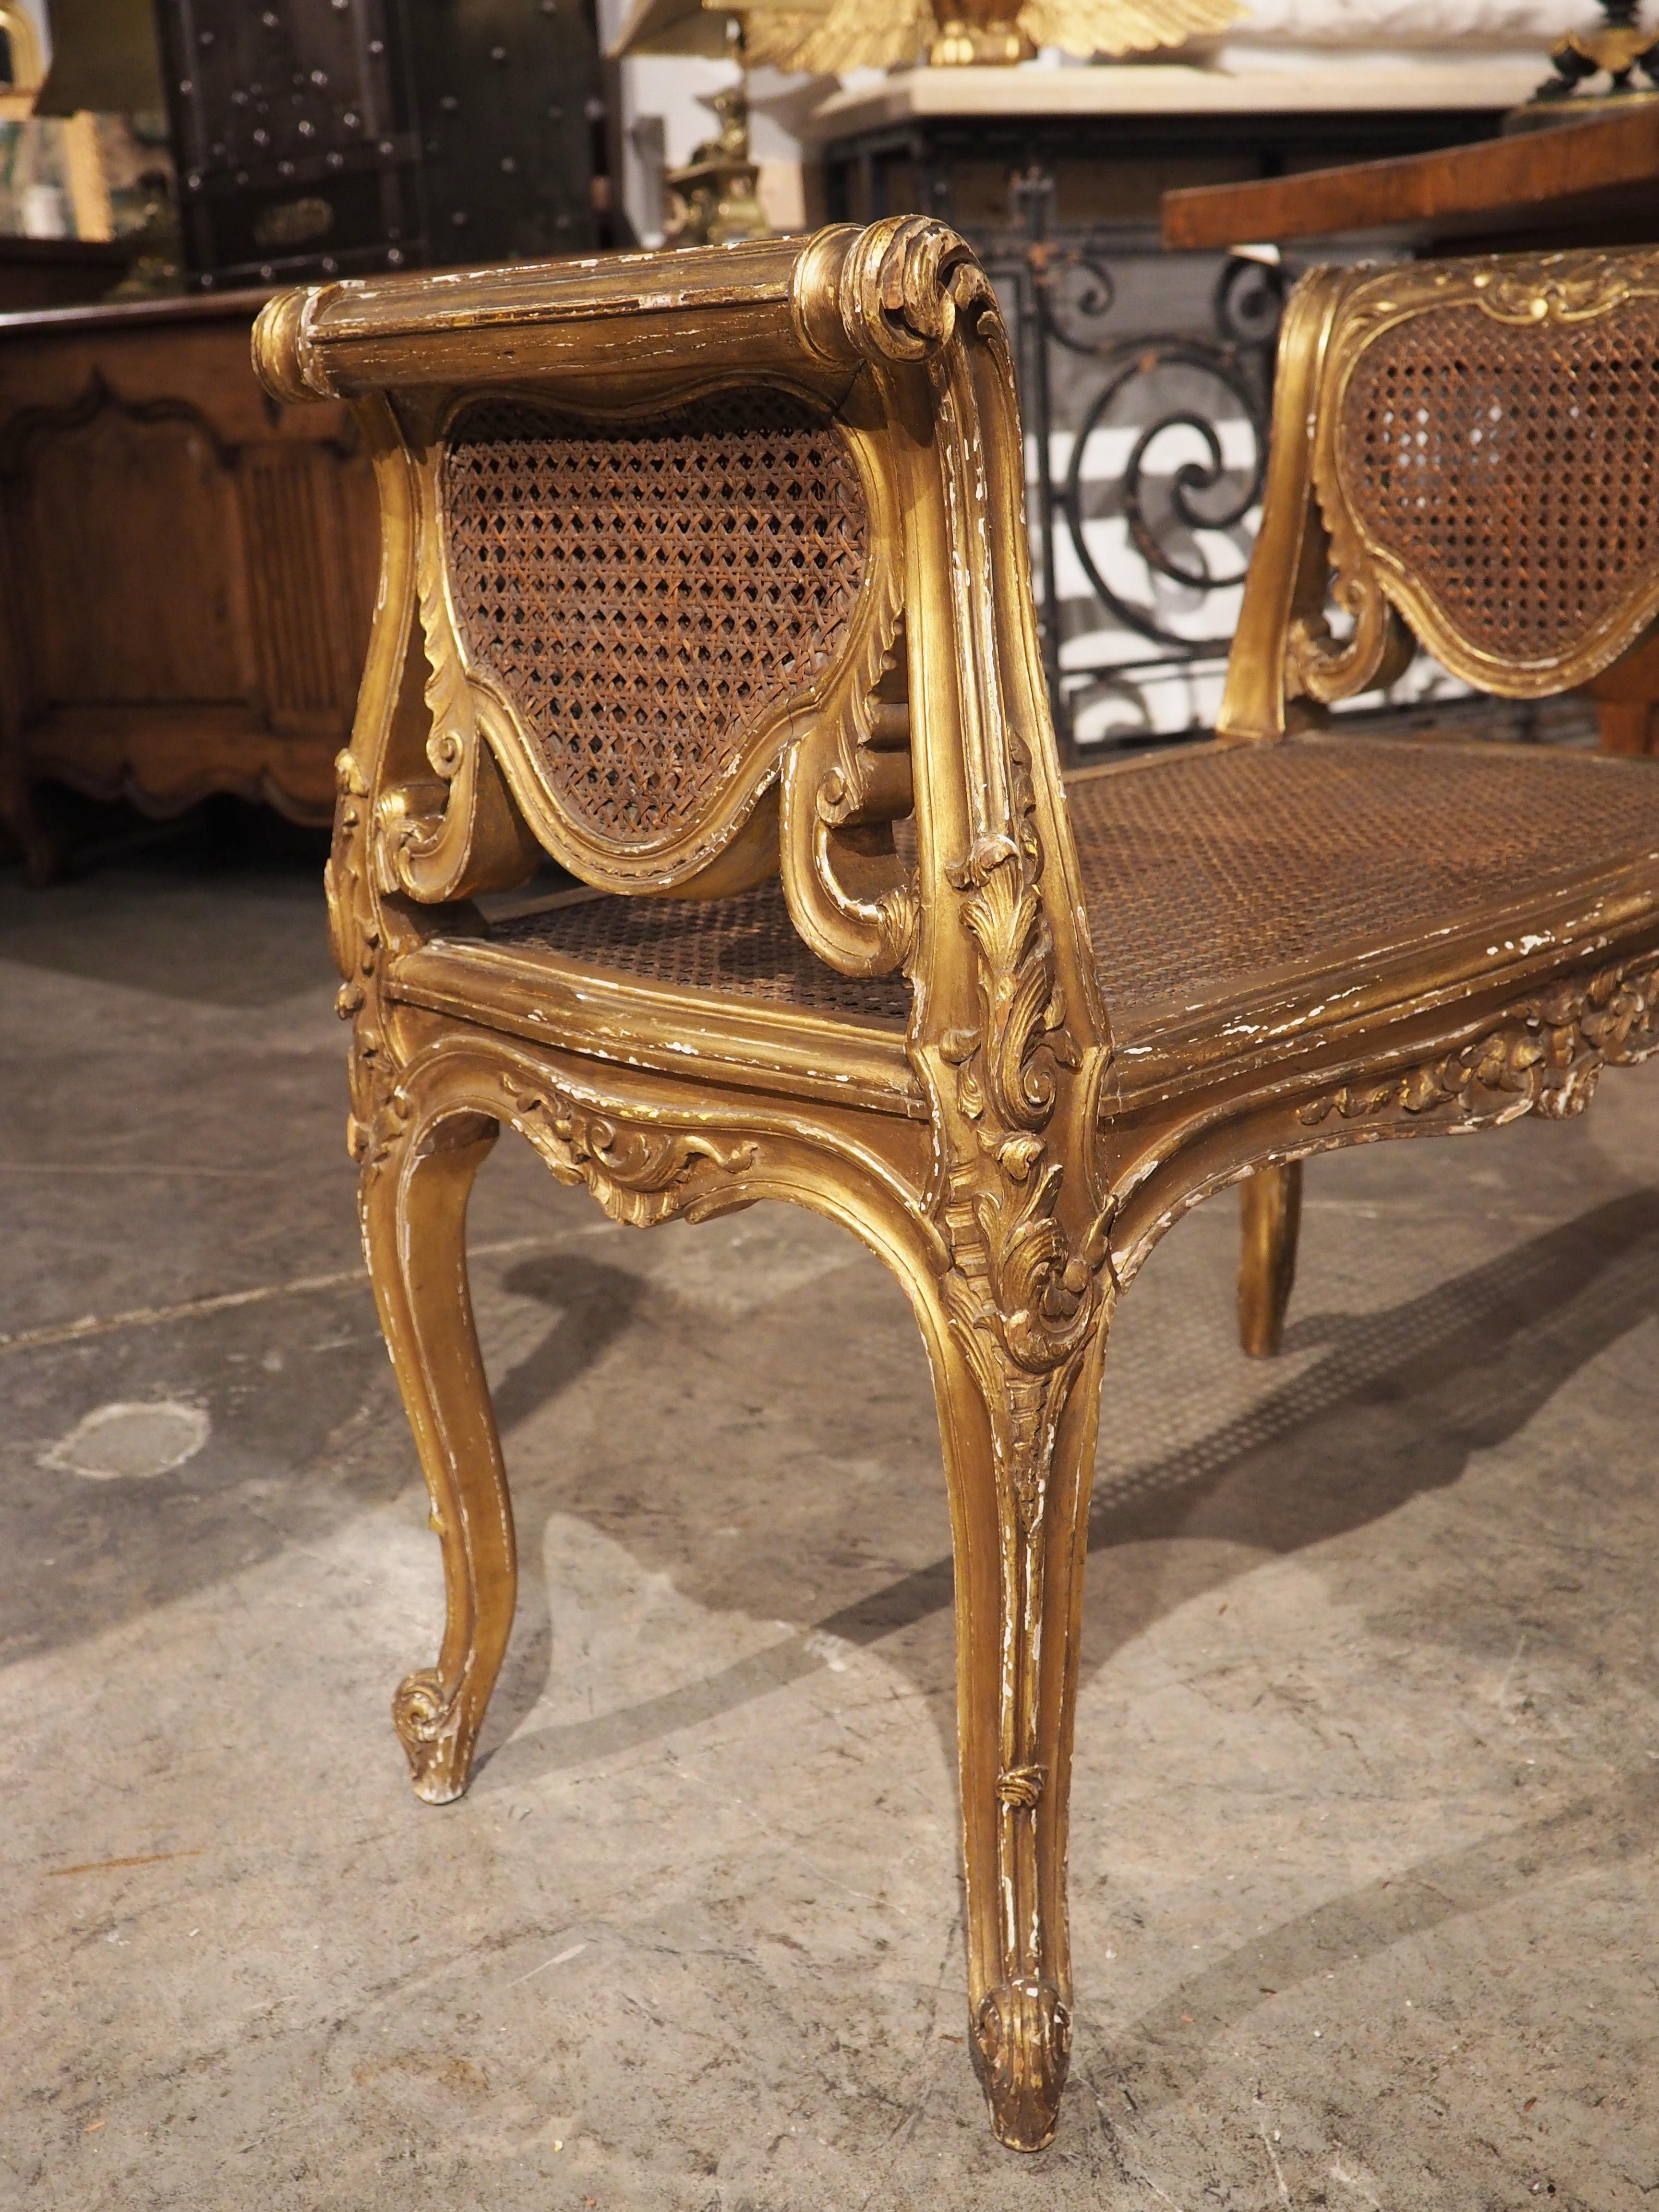 Caning Louis XV Style Giltwood and Caned Banquette from France, circa 1850